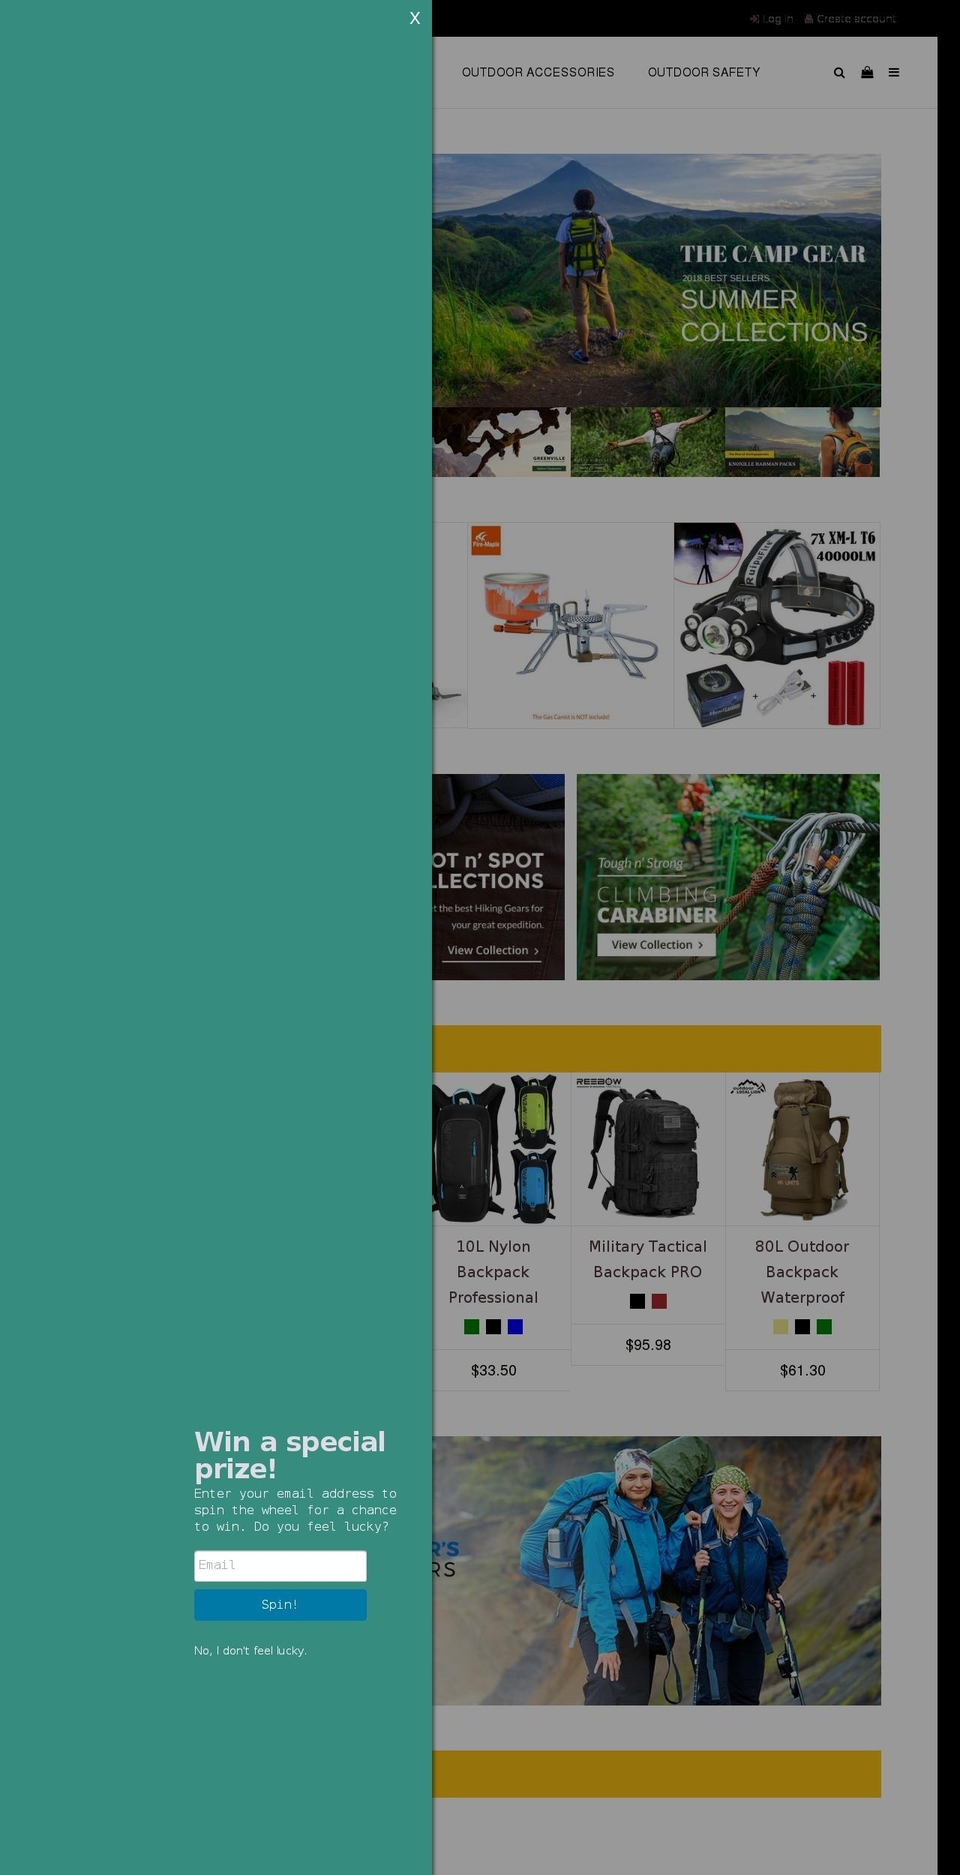 install Shopify theme site example thecampgear.com